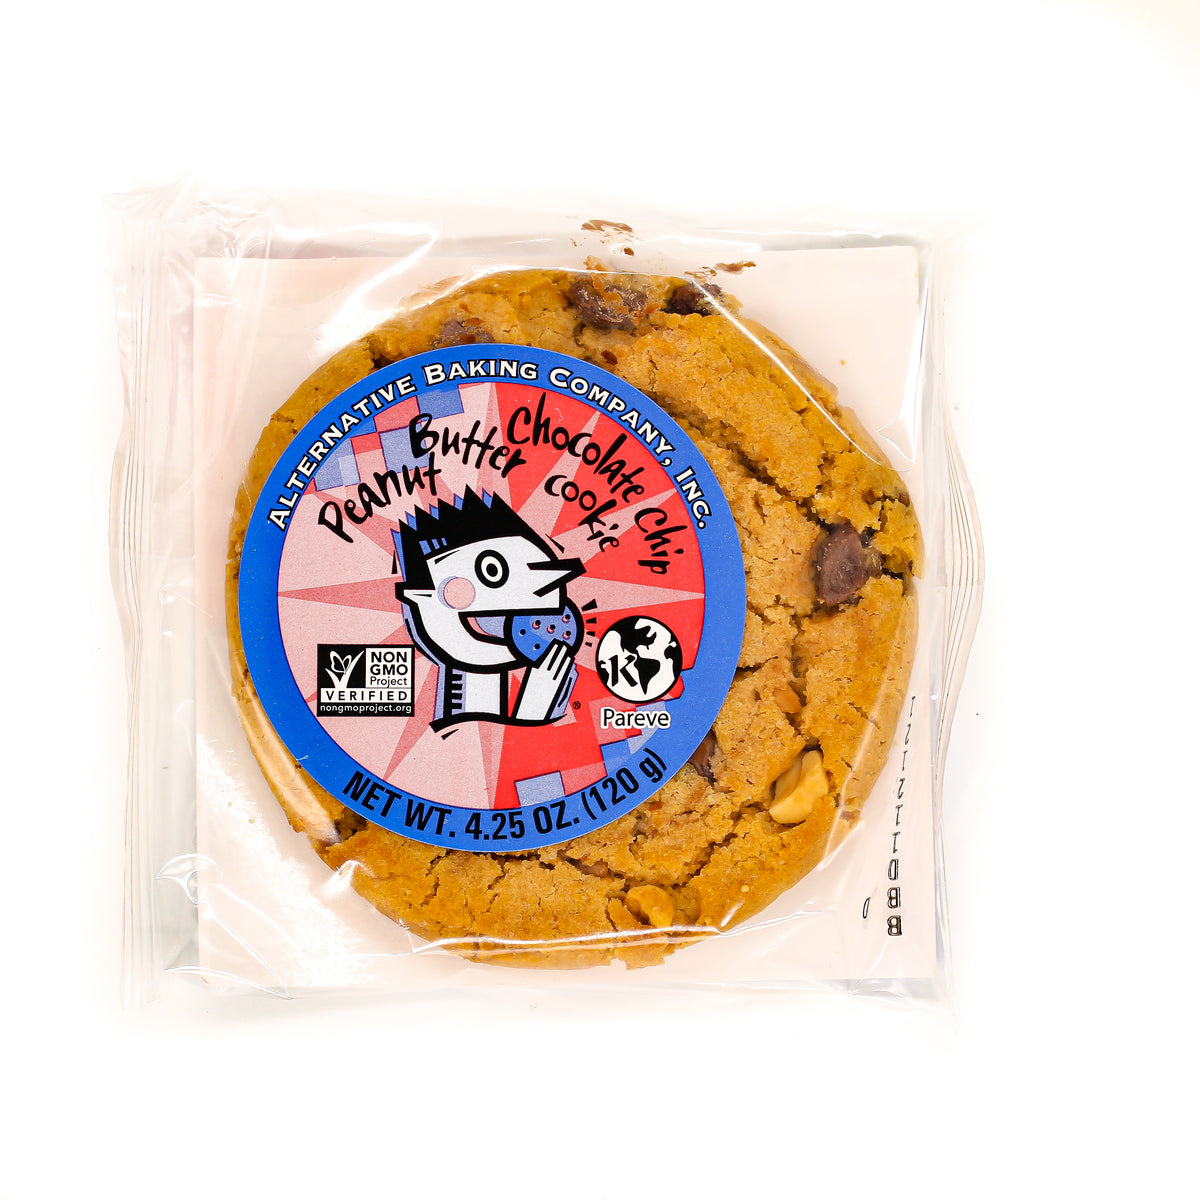 Alternative Baking Company Cookie Peanut Butter Chocolate Chip